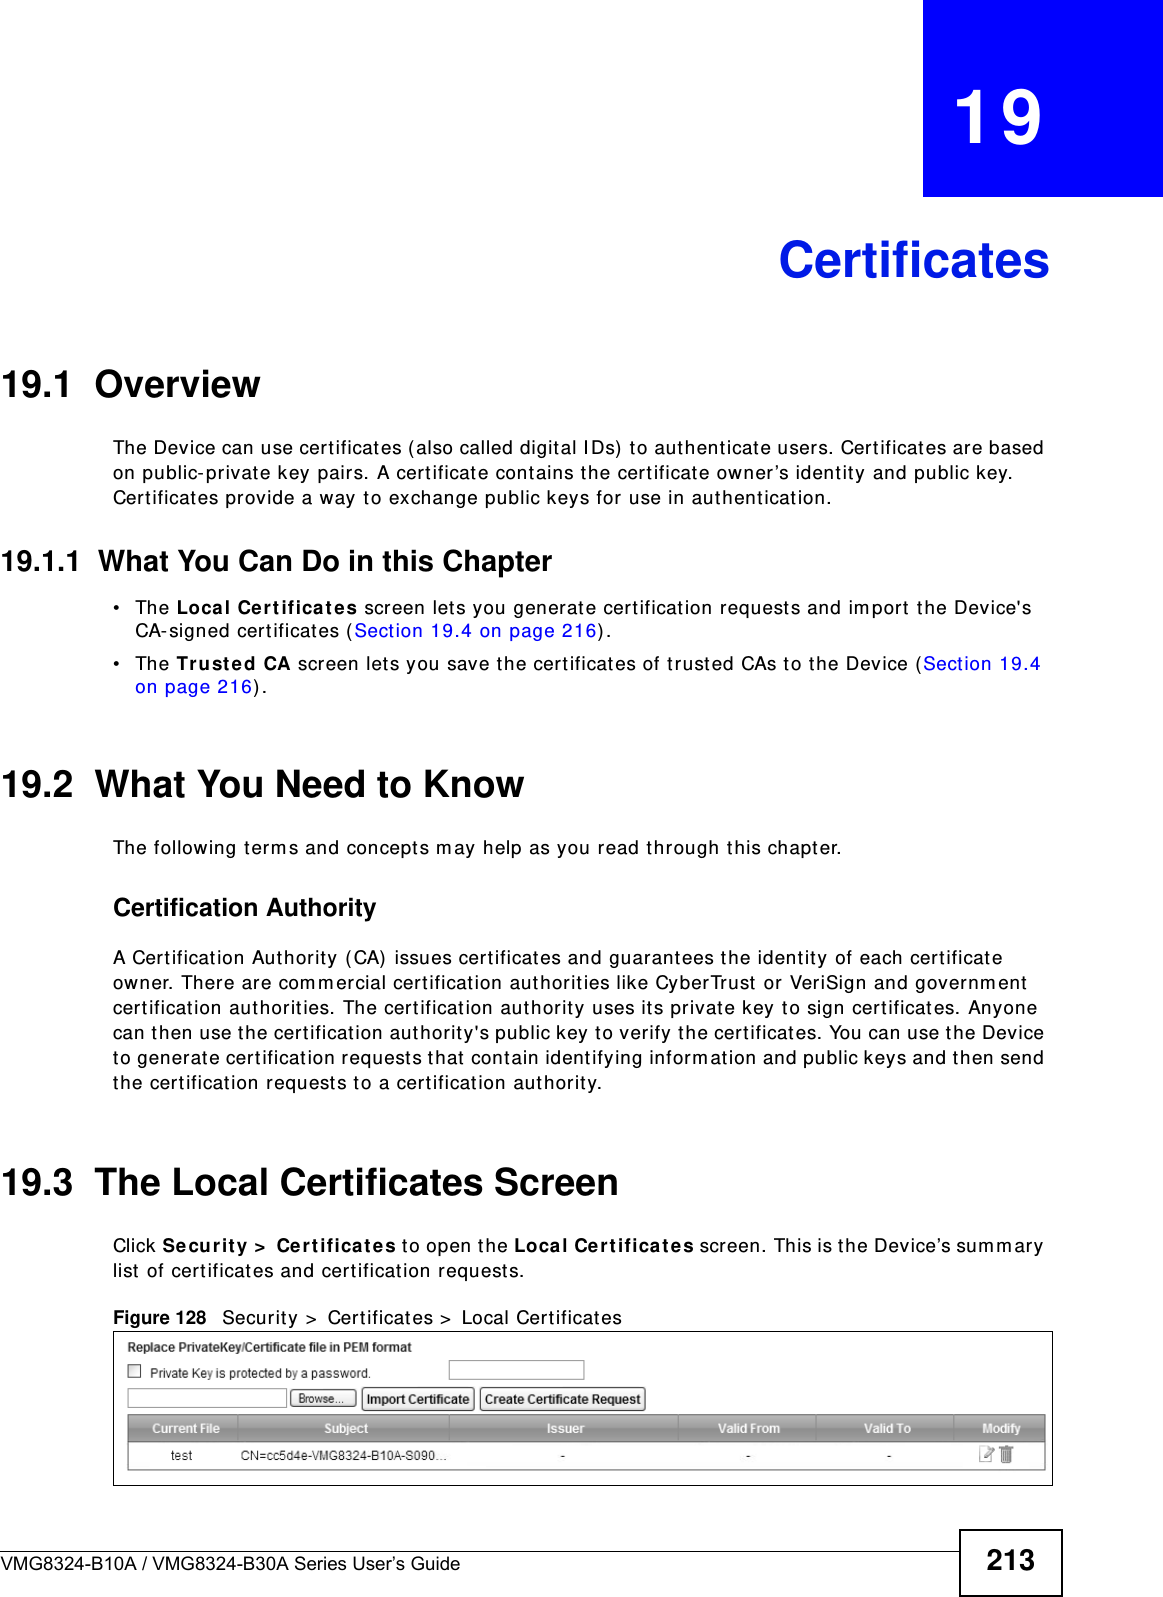 VMG8324-B10A / VMG8324-B30A Series User’s Guide 213CHAPTER   19Certificates19.1  OverviewThe Device can use certificates ( also called digital I Ds)  to aut henticate users. Cert ificates ar e based on public- private key pairs. A cert ificat e cont ains the certificat e owner’s identit y and public key. Cert ificat es provide a way to exchange public keys for use in aut hent icat ion. 19.1.1  What You Can Do in this Chapter• The Loca l Cert ifica te s screen let s you generat e cert ificat ion request s and im port  t he Device&apos;s CA- signed certificates ( Sect ion 19.4 on page 216) .• The Trust ed CA screen let s you save t he certificates of t rusted CAs t o t he Device (Section 19.4 on page 216) .19.2  What You Need to KnowThe following t erm s and concept s m ay help as you read t hr ough this chapter.Certification Authority A Cert ification Authority (CA)  issues cert ificat es and guarant ees the ident ity of each certificat e owner. There are com m ercial certificat ion aut horit ies like CyberTrust  or VeriSign and governm ent  cert ification authorities. The cert ification authority uses it s private key to sign cert ificat es. Anyone can then use the certificat ion authority&apos;s public key to verify the certificates. You can use the Device to generat e certification requests that contain identifying inform at ion and public keys and t hen send the certification requests t o a cert ificat ion authorit y.19.3  The Local Certificates ScreenClick Secur it y &gt;  Ce r t ifica t e s to open the Loca l Ce rt ificat es screen. This is t he Device’s sum m ary list of cert ificat es and cert ificat ion requests. Figure 128   Securit y &gt;  Certificates &gt;  Local Cert ificat es 